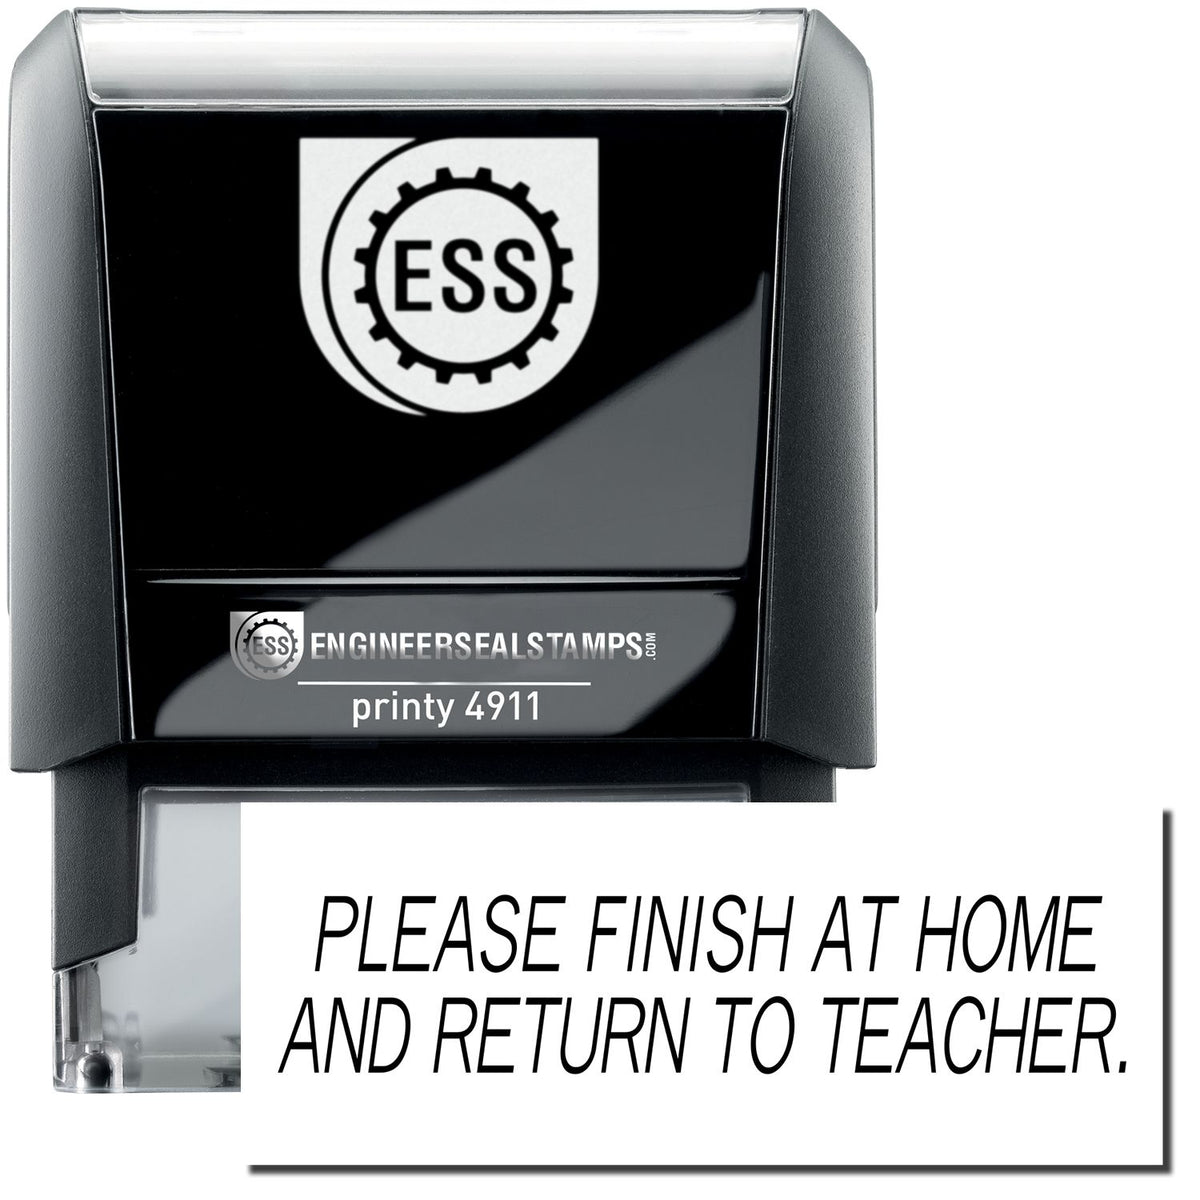 A self-inking stamp with a stamped image showing how the text &quot;PLEASE FINISH AT HOME AND RETURN TO TEACHER.&quot; is displayed after stamping.